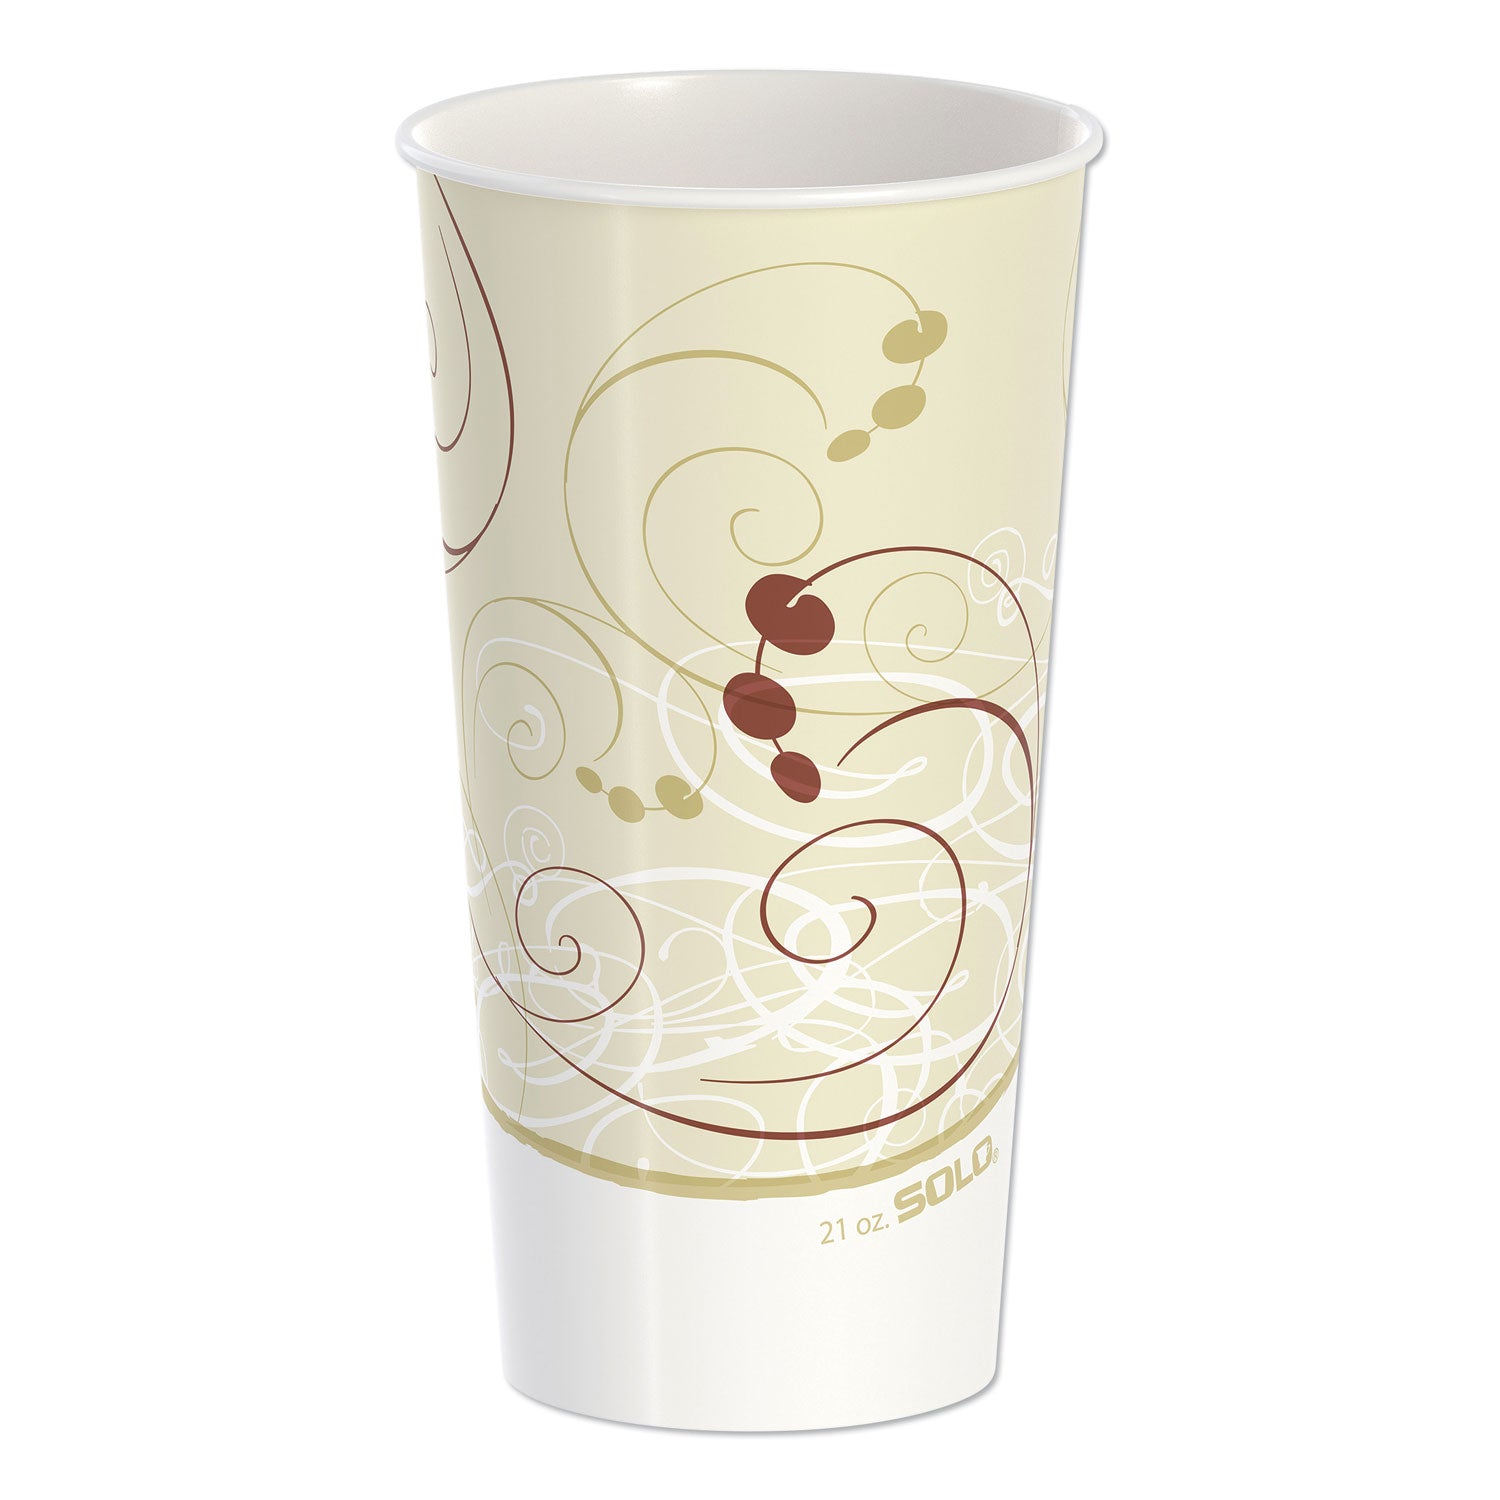 double-sided-poly-paper-cold-cups-21-oz-symphony-design-tan-maroon-white-50-pack-20-packs-carton_sccrnp21psym - 1